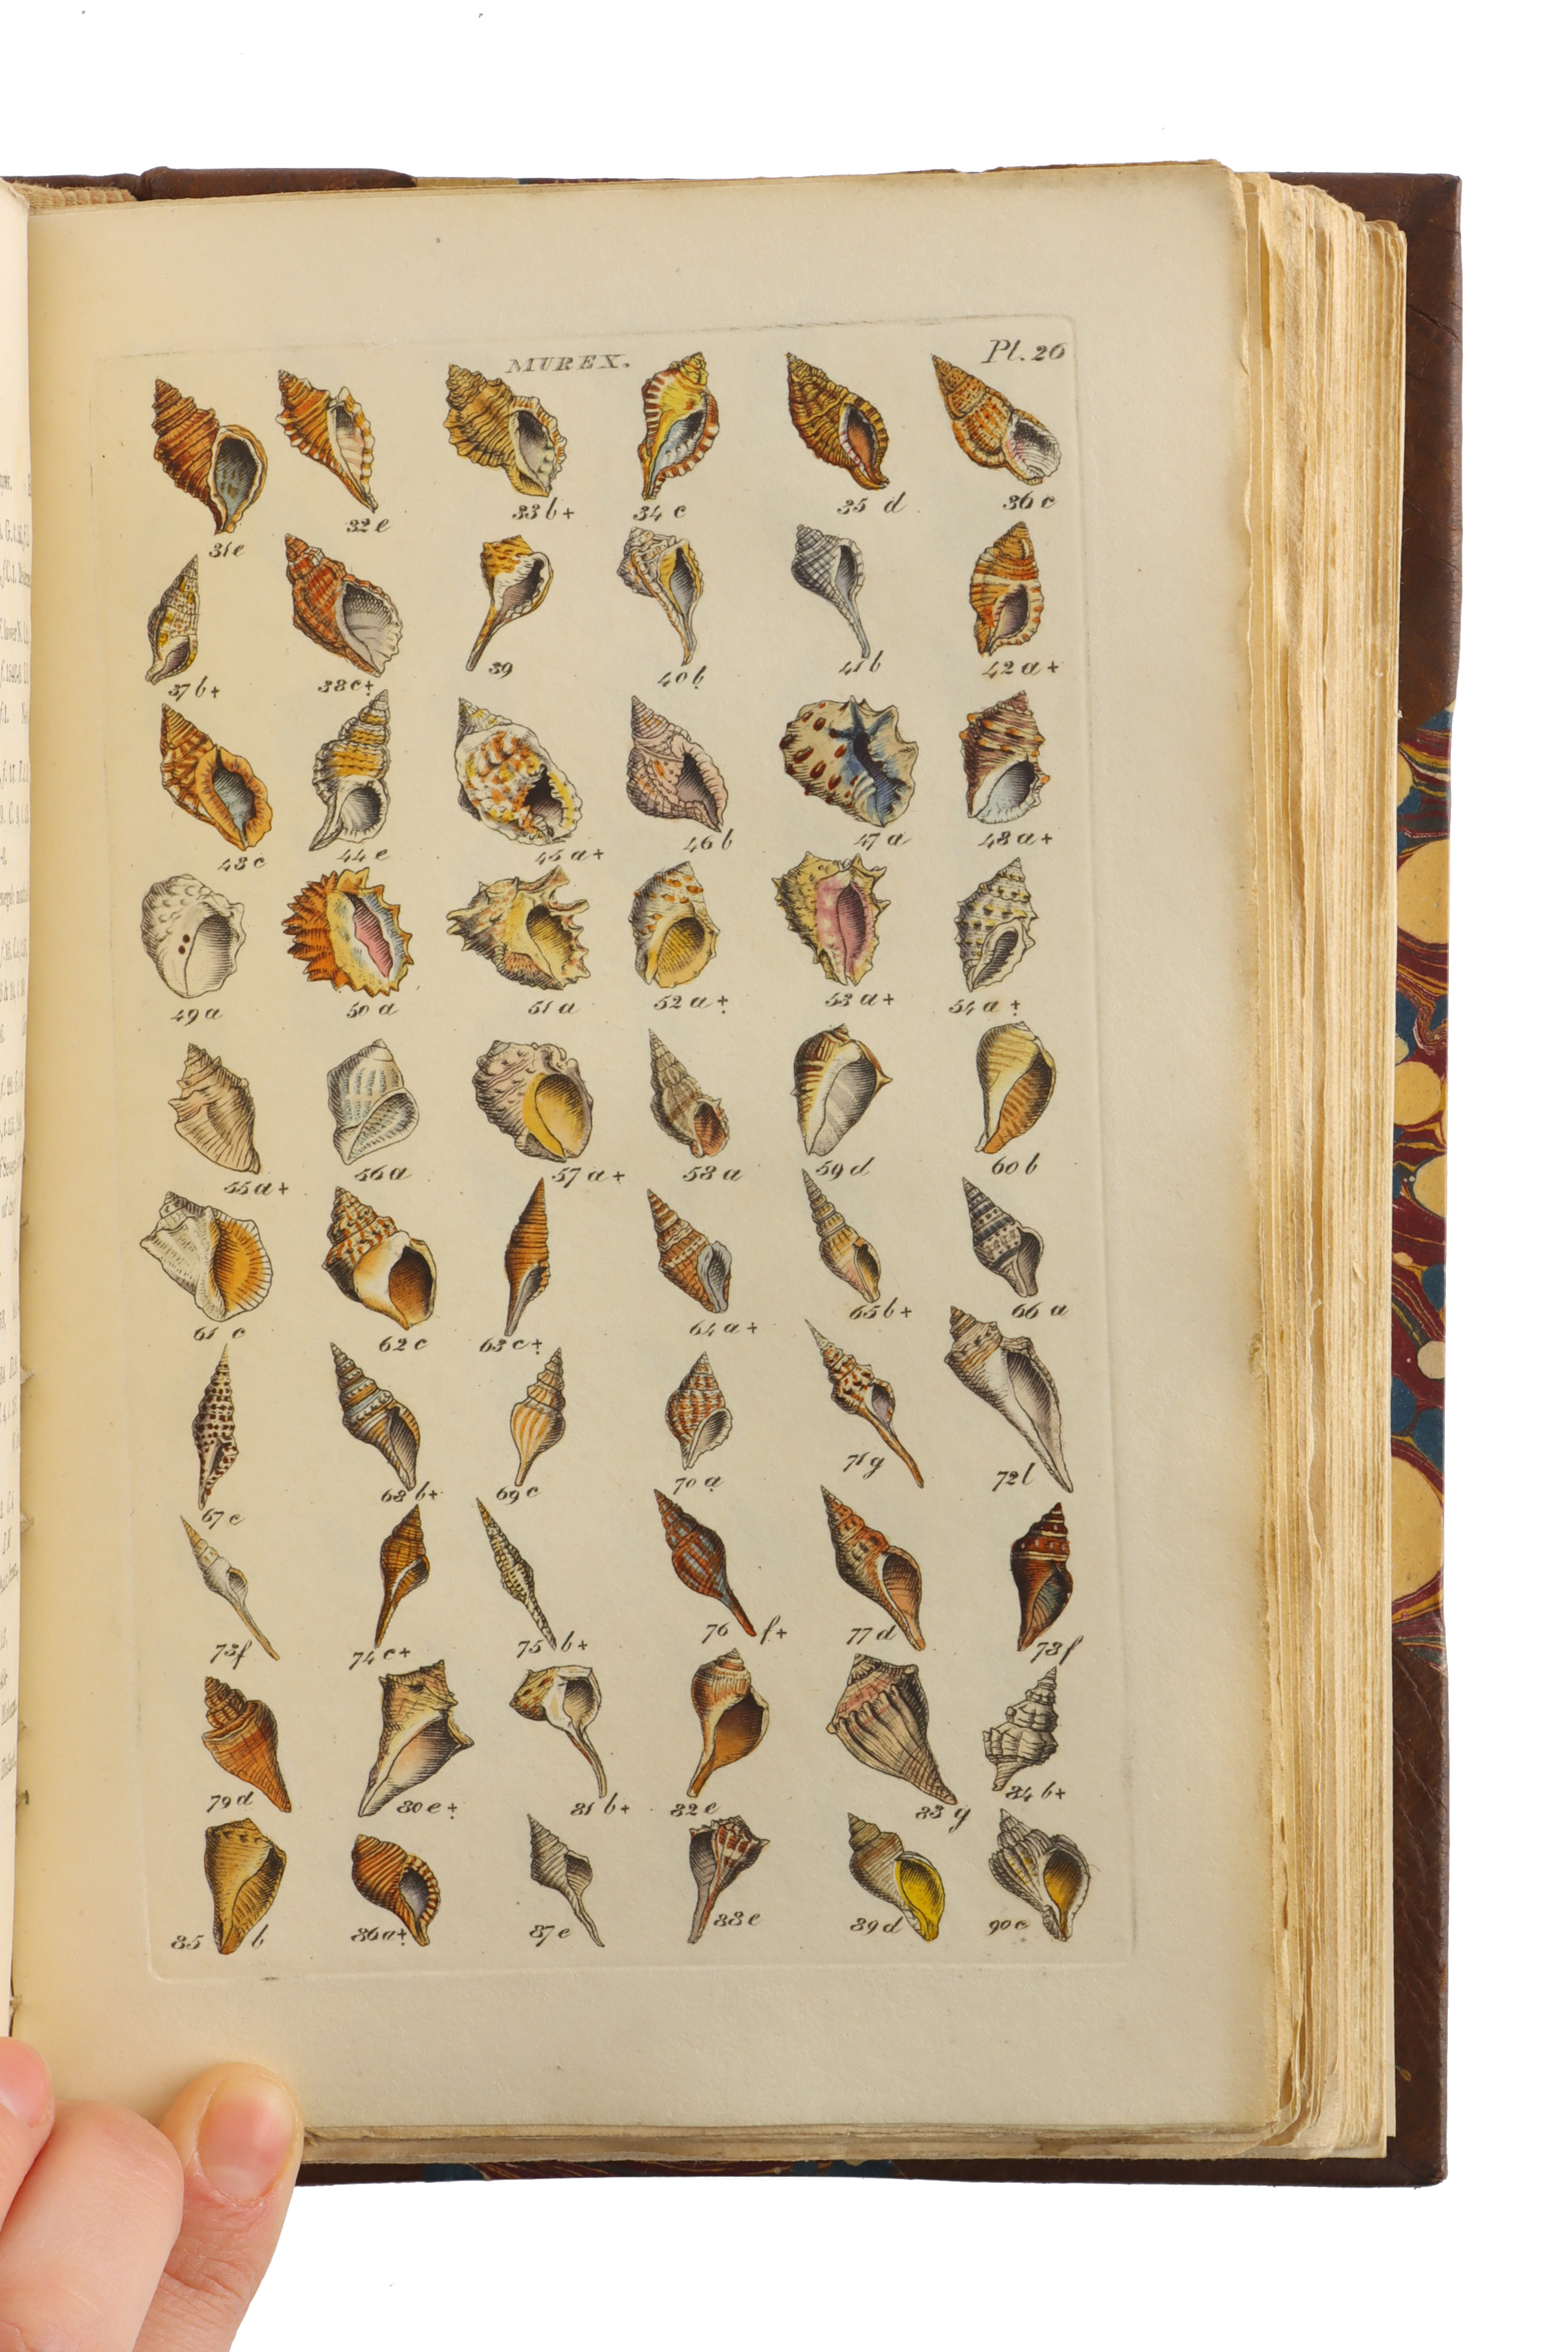 Wood, W, Index Testaceologicus; or A Catalogue of Shells, British and Foreign.. - Image 4 of 4